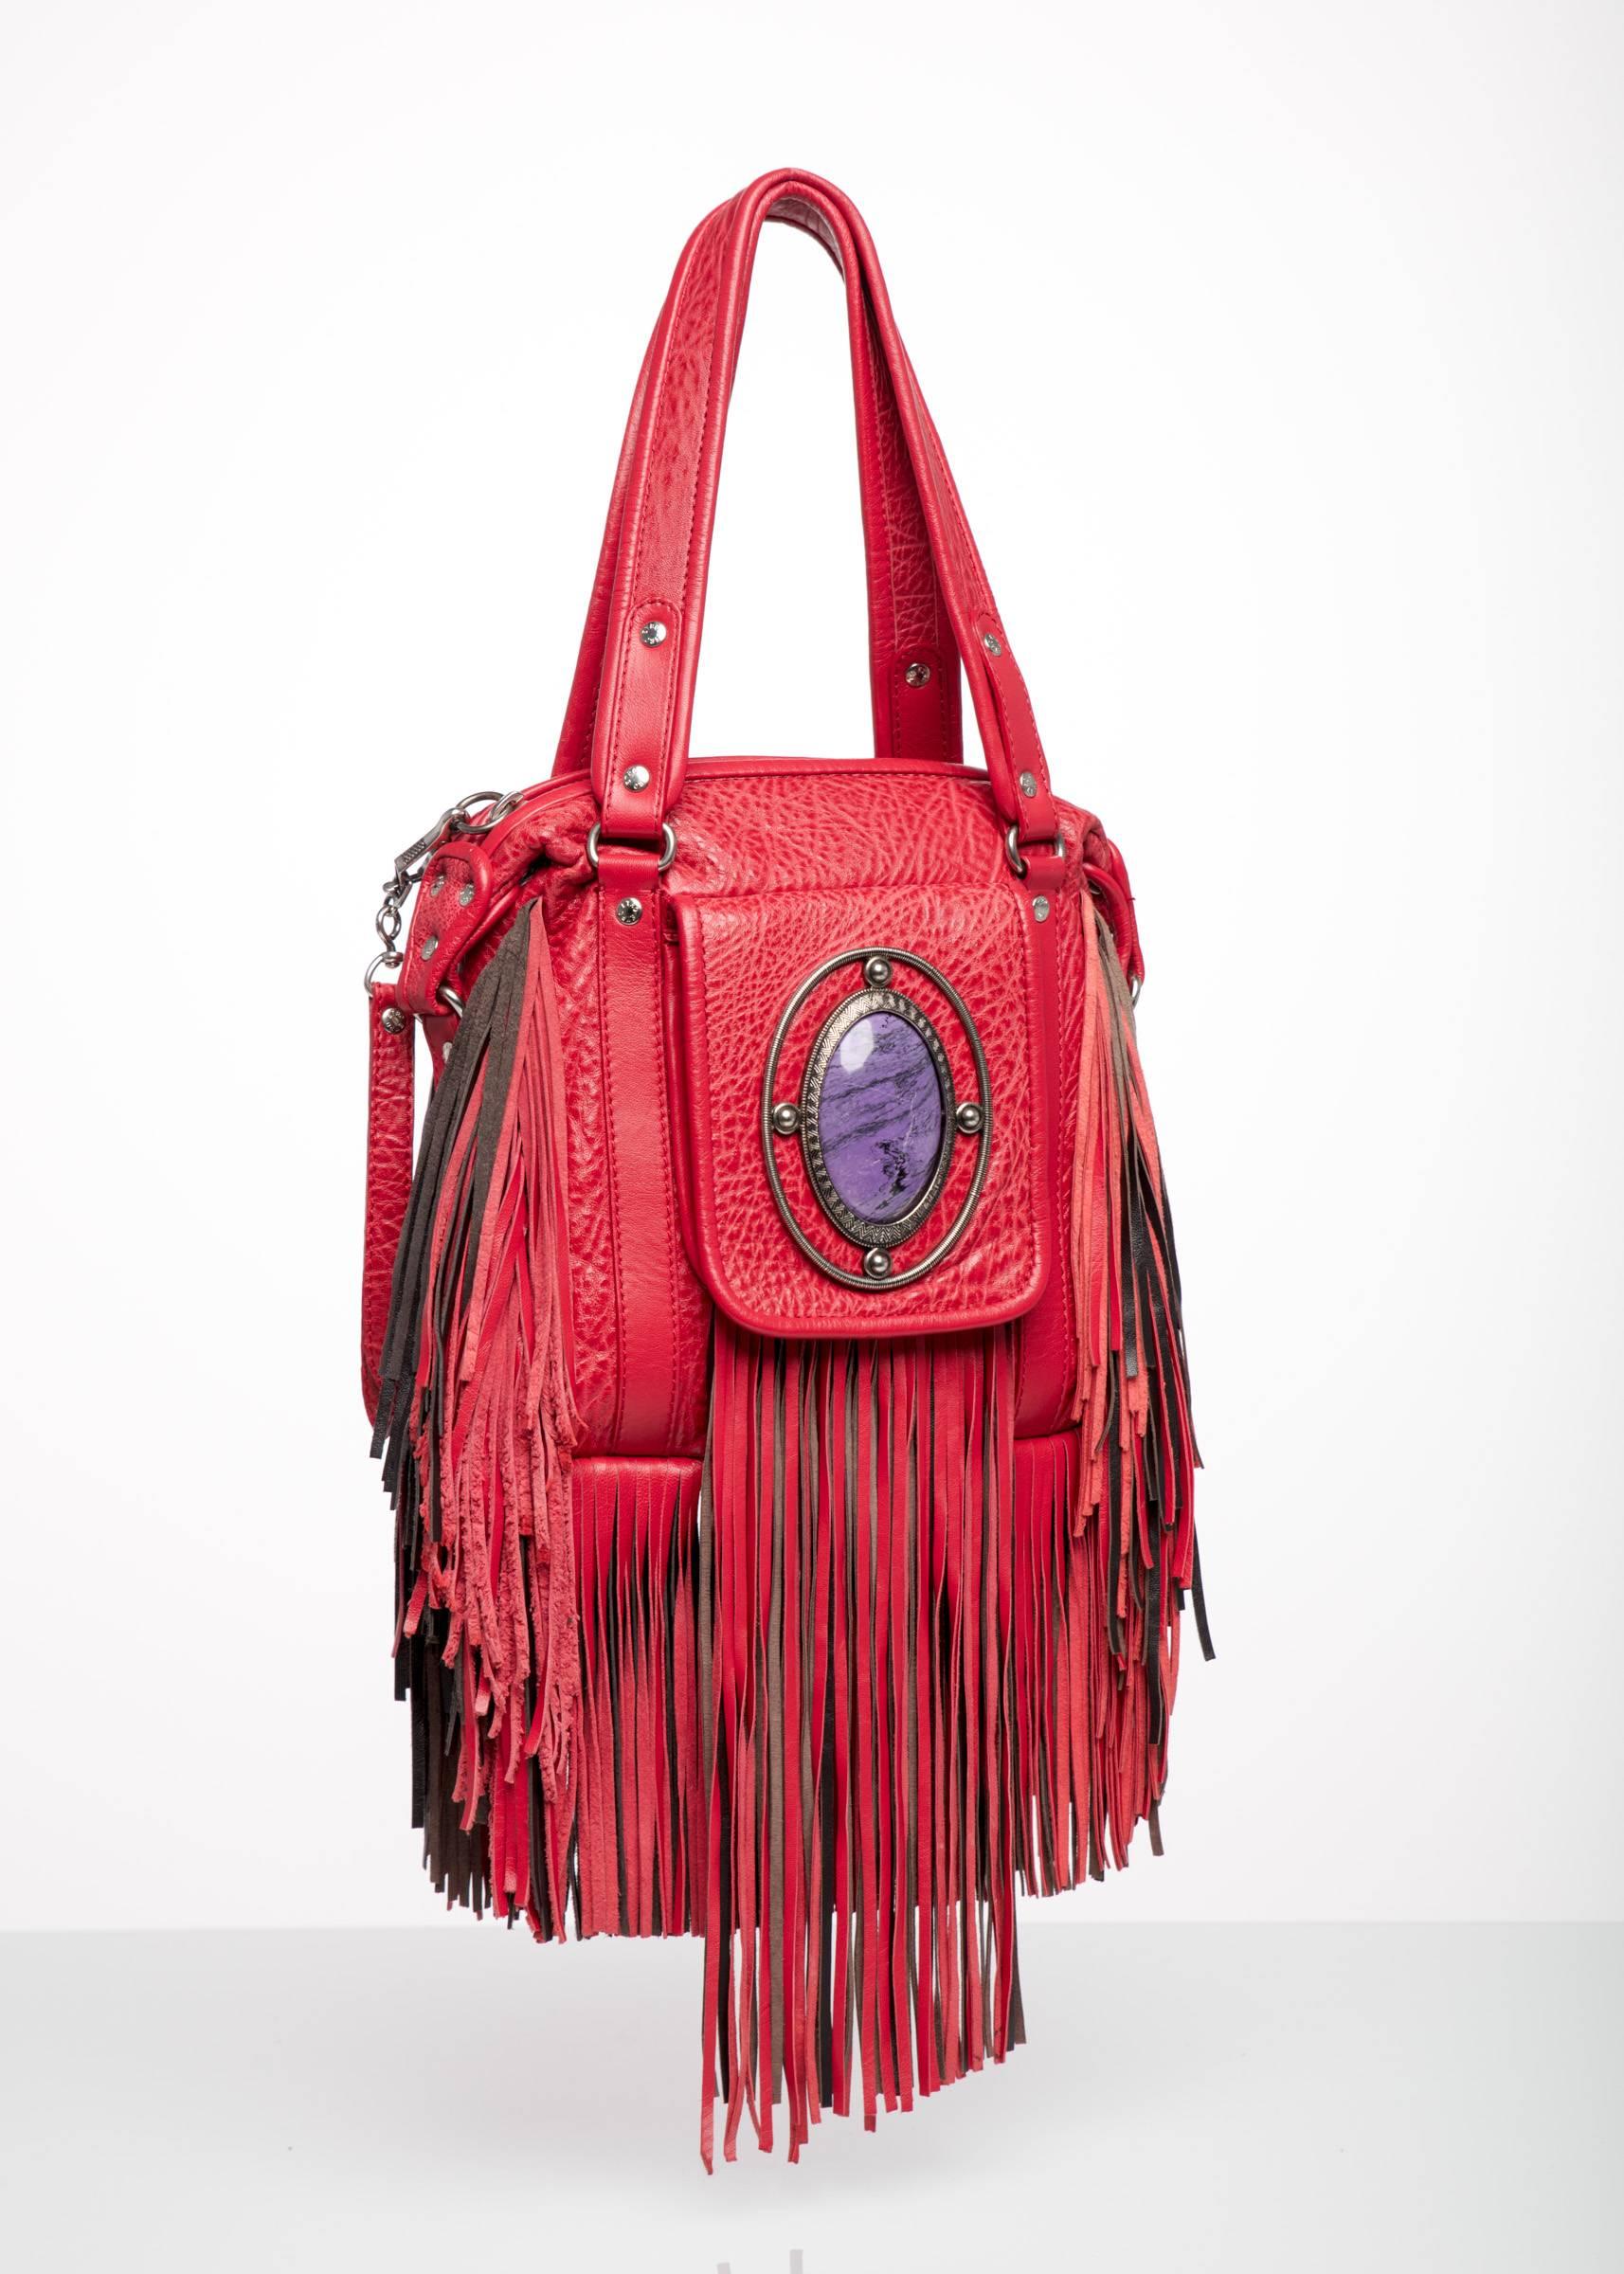 Ergo Bag With Fringe In Upcrafted Leather | Coachtopia ™